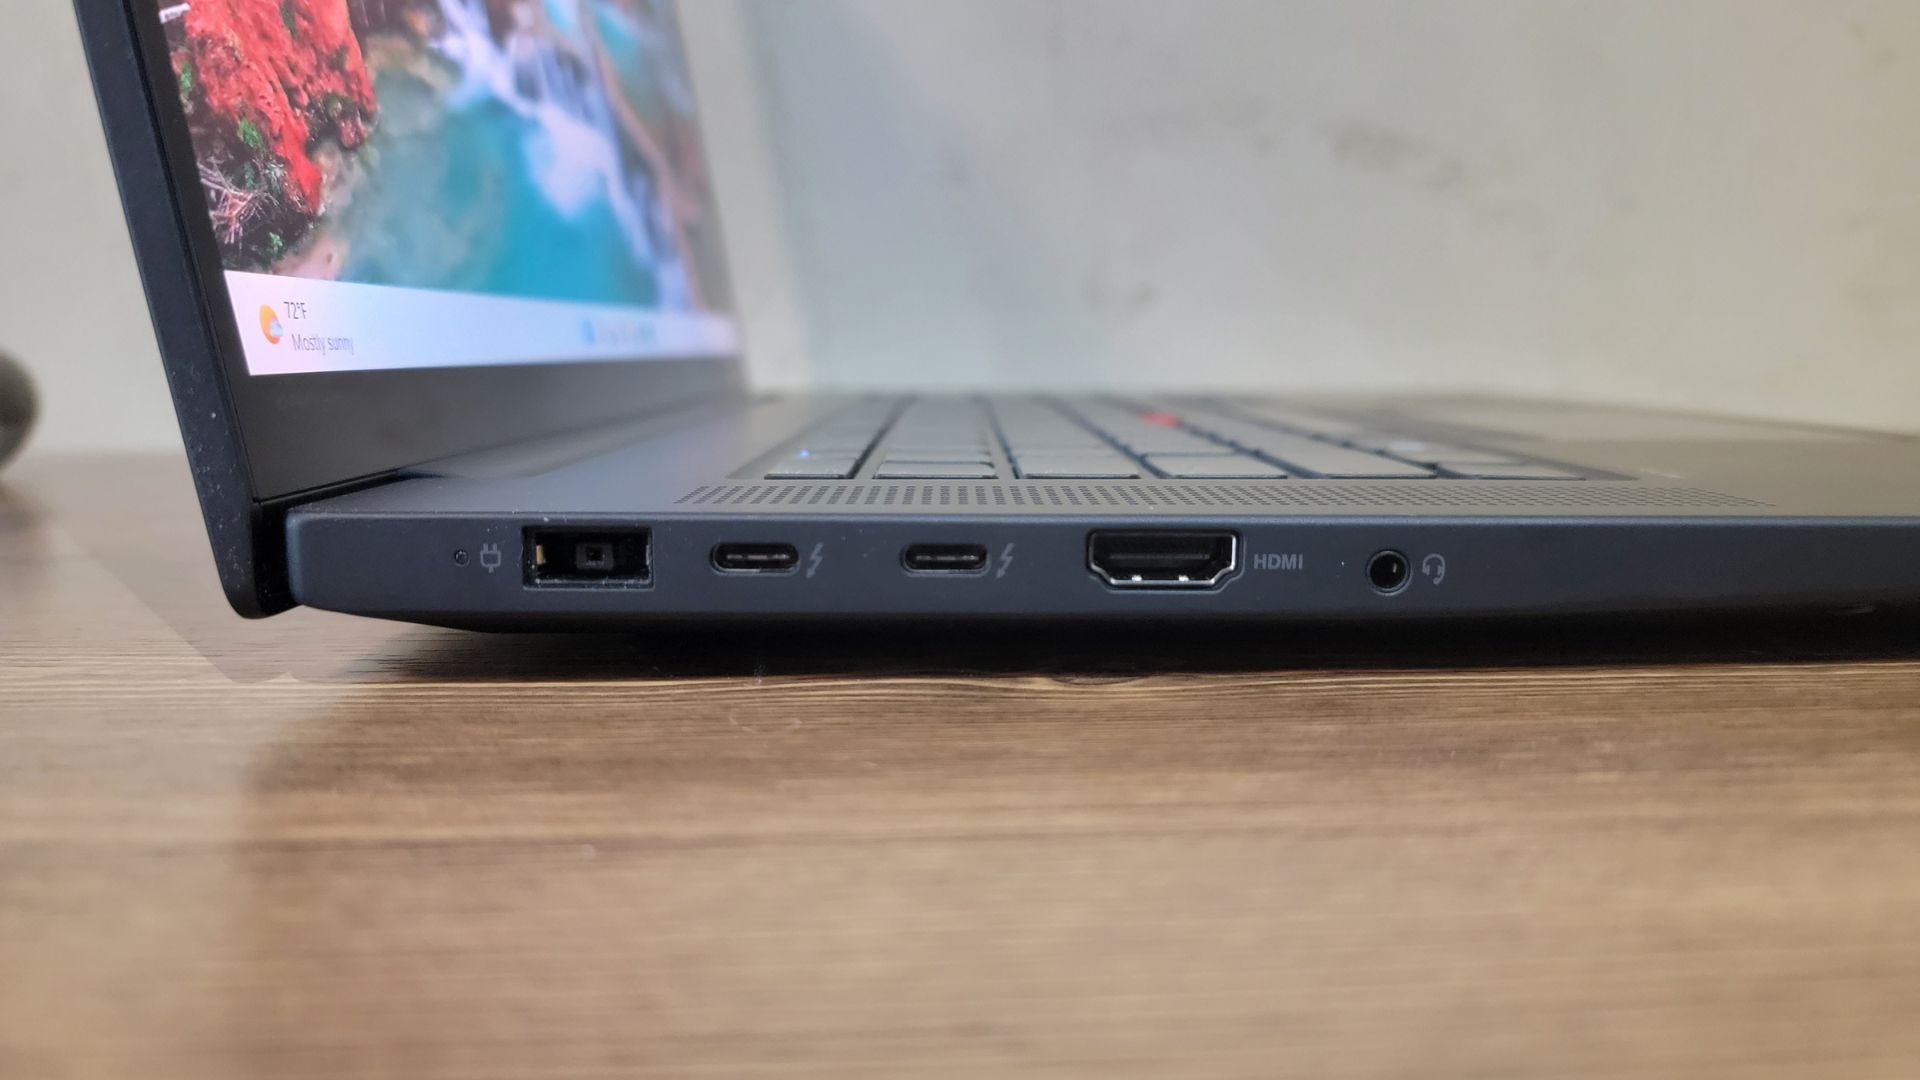 Ports available on the left side of Lenovo ThinkPad X1 Extreme Gen 5